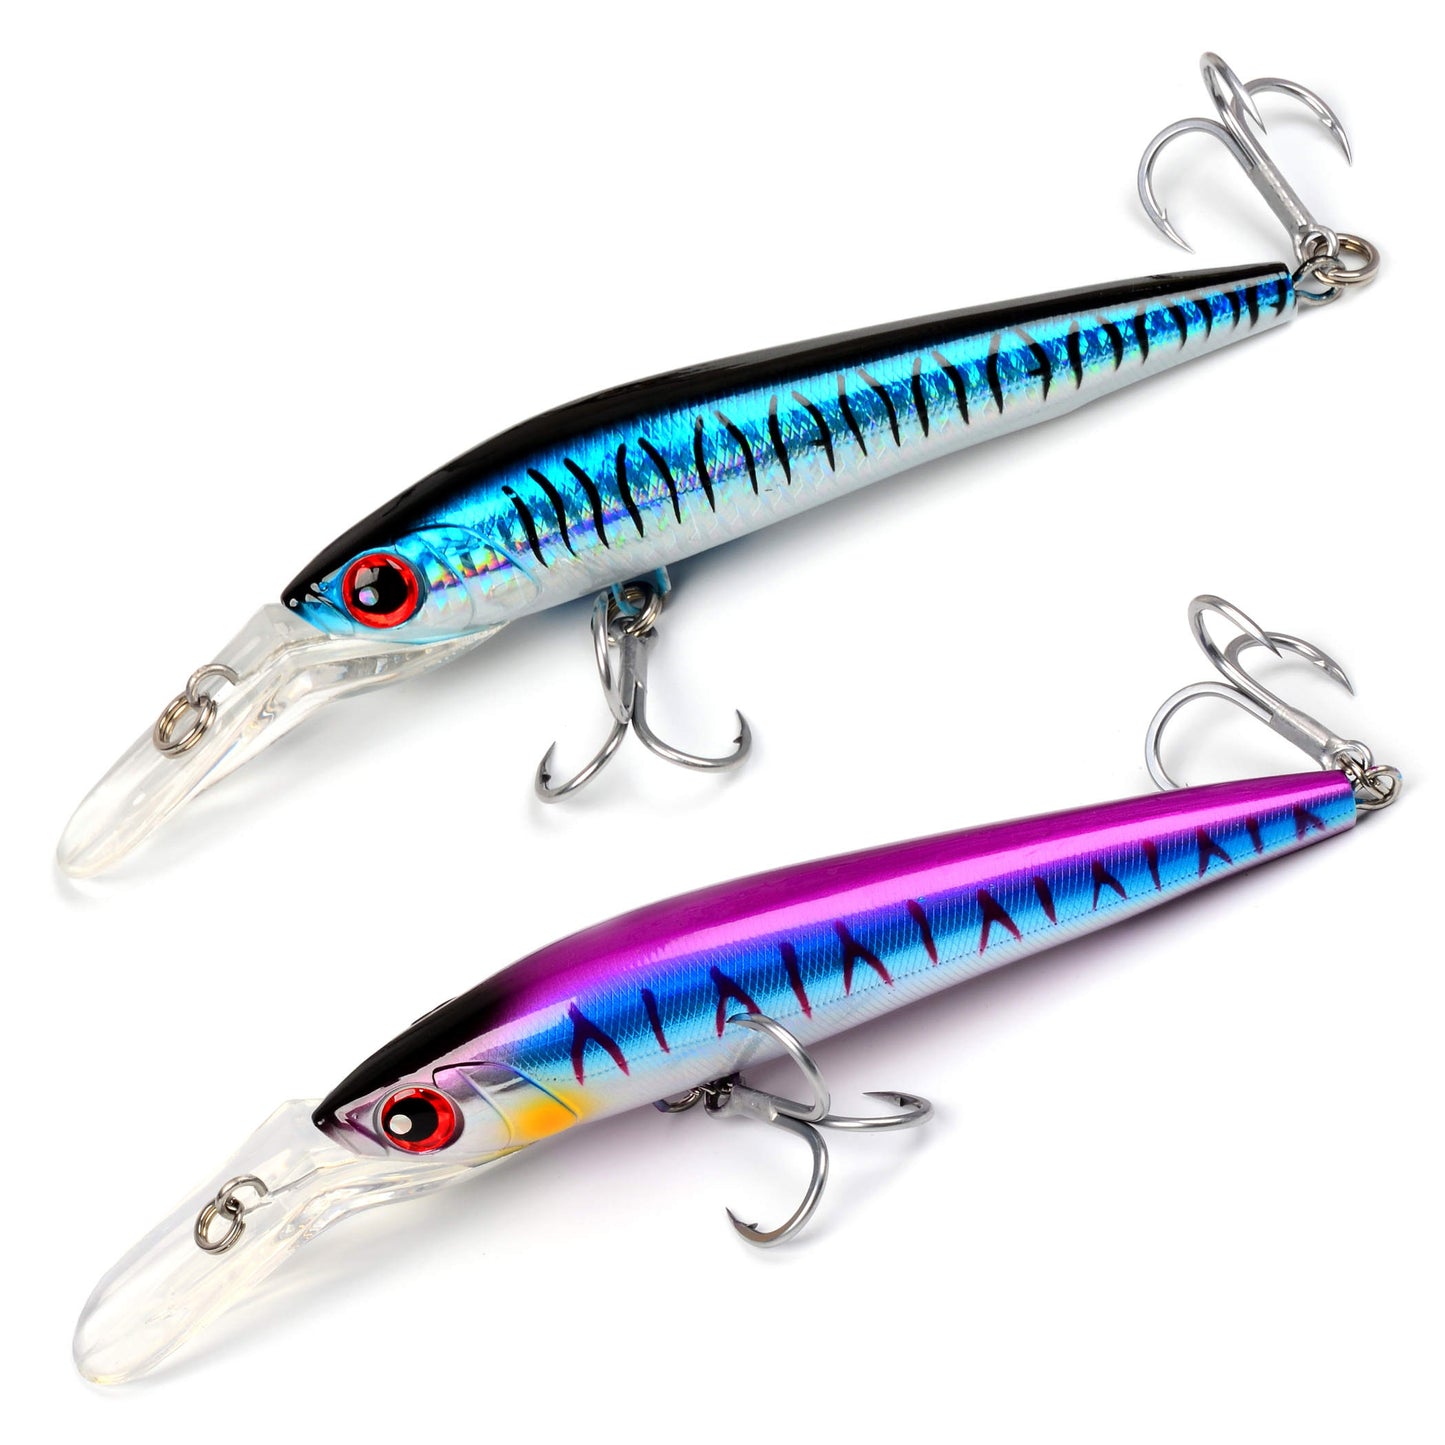 THE BEST DEEP DIVE TROLLING LURE 